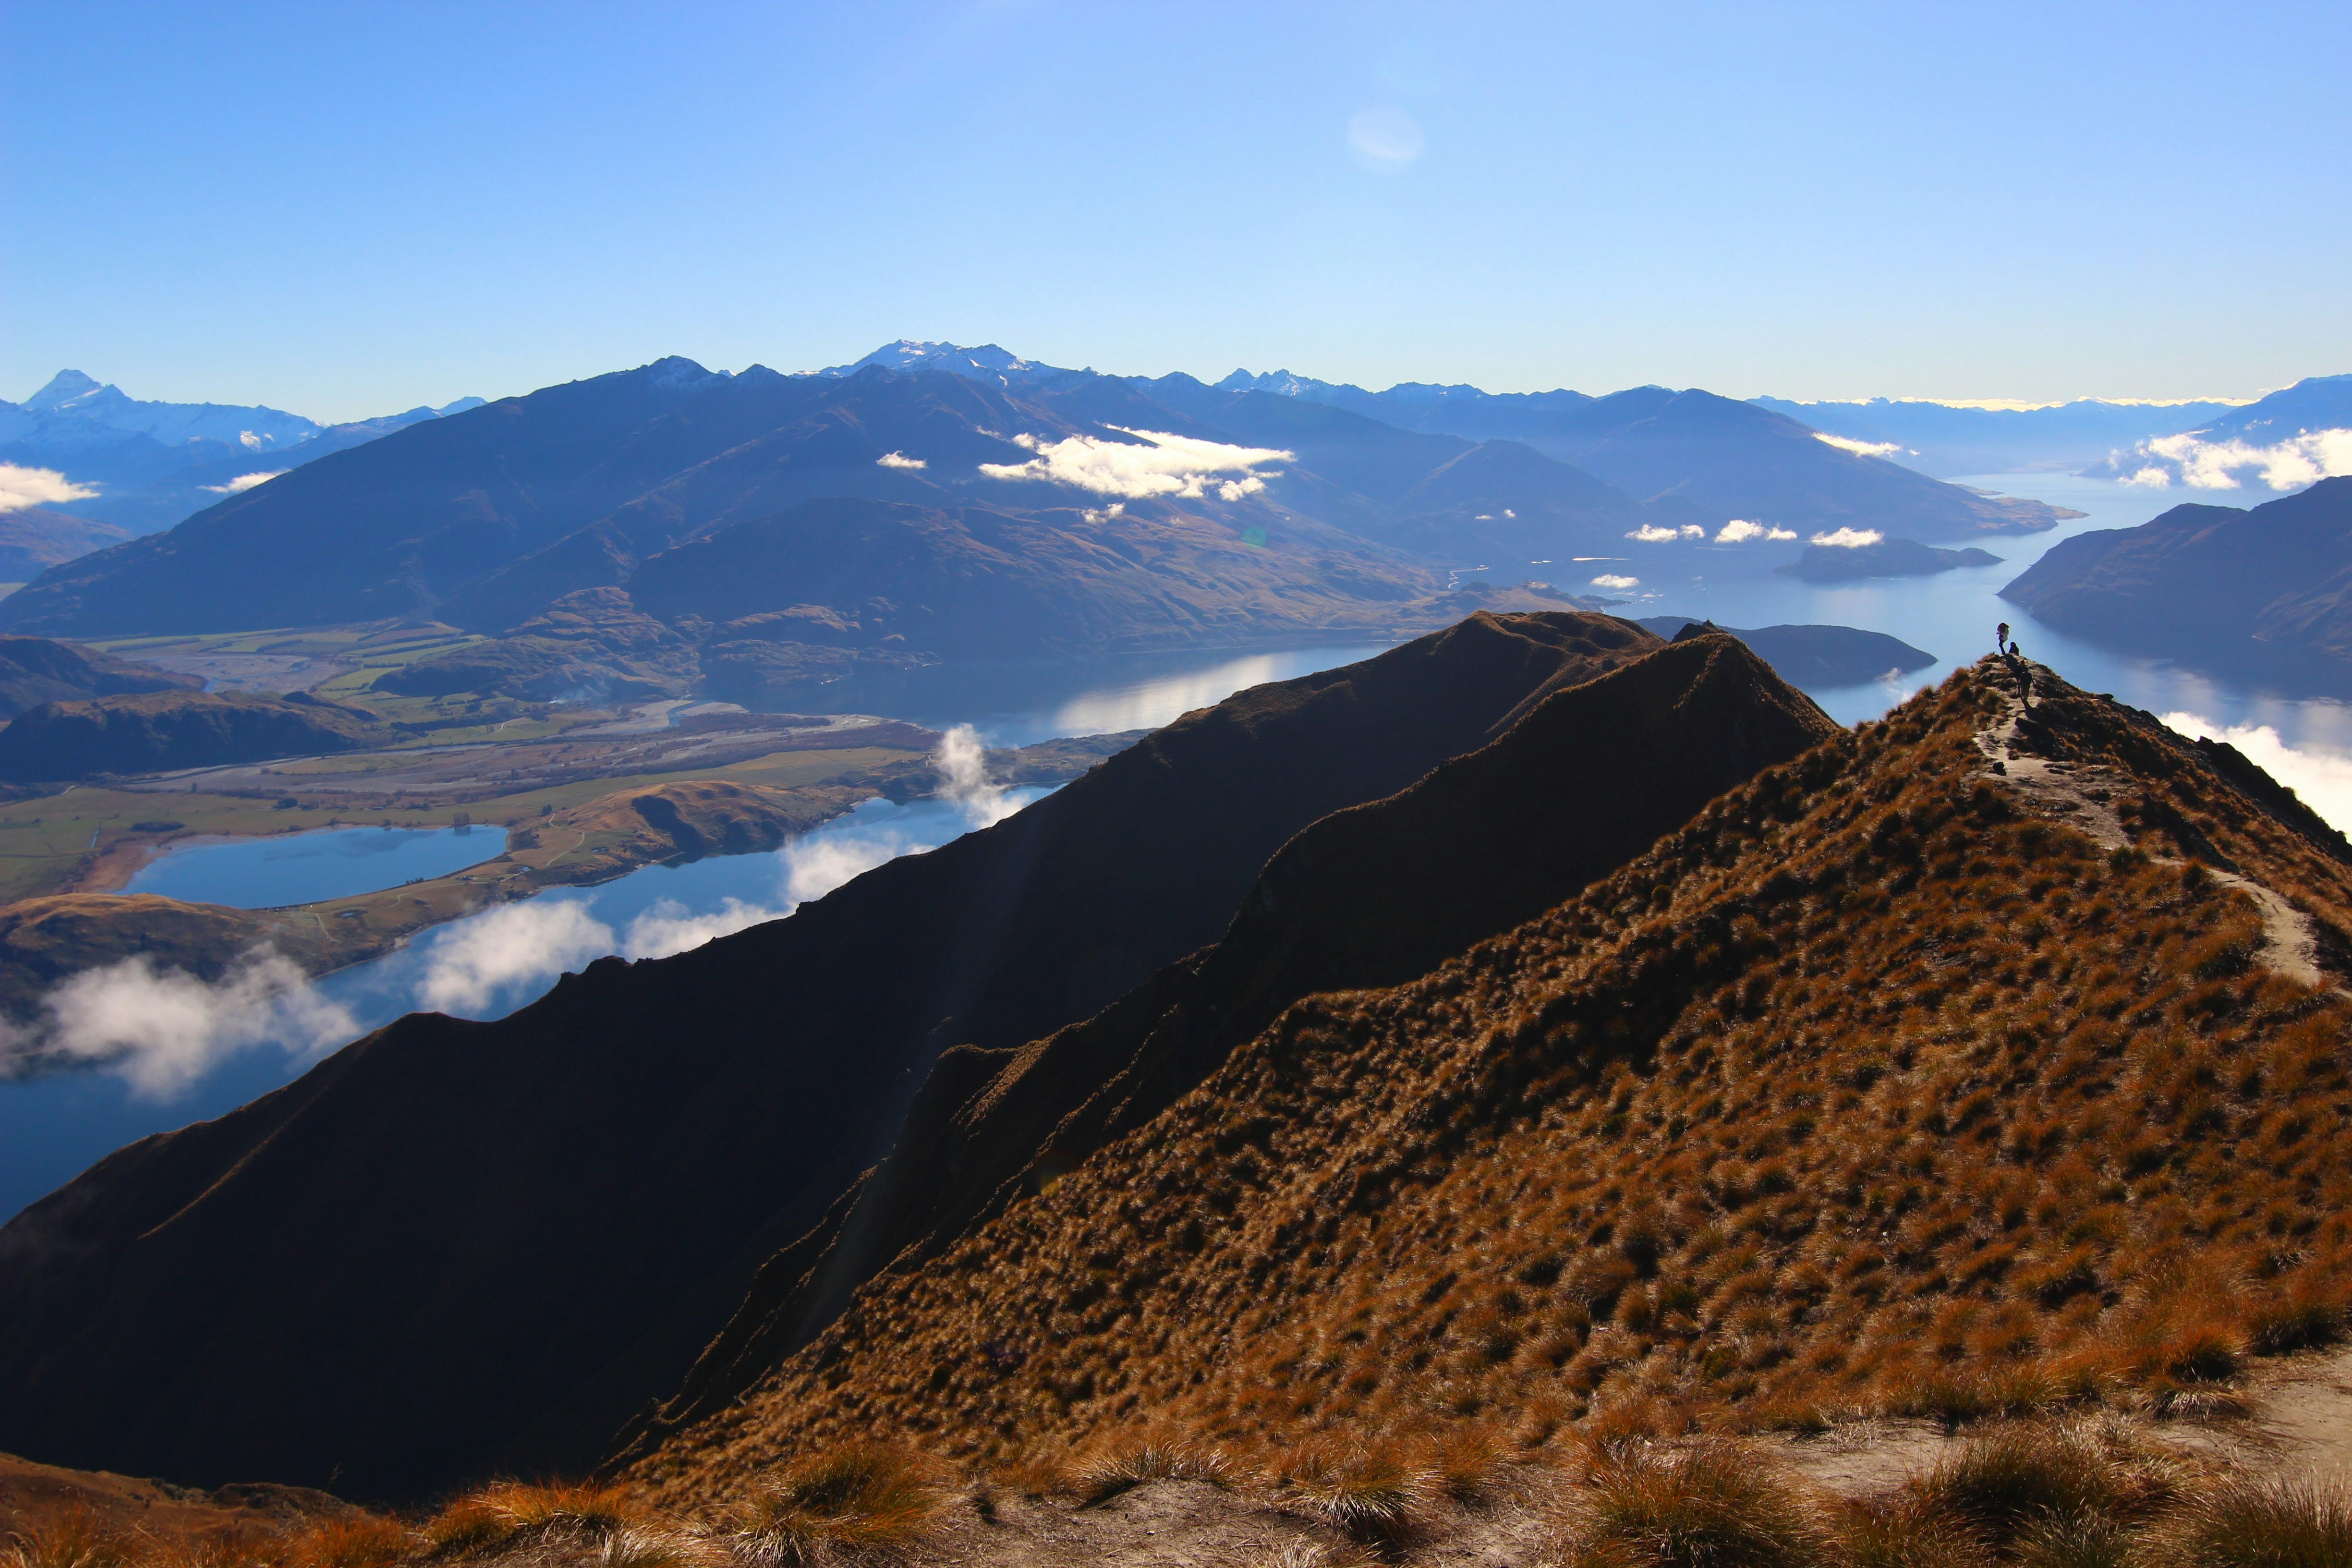 While on an eight month backpacking journey, we stopped by Queenstown, New Zealand to visit a friend in Wanaka. Not knowing this was a miserable six hour hike up to Roy’s Peak, we happily agreed but were met with some of the most humbling views. Worth it in the end!